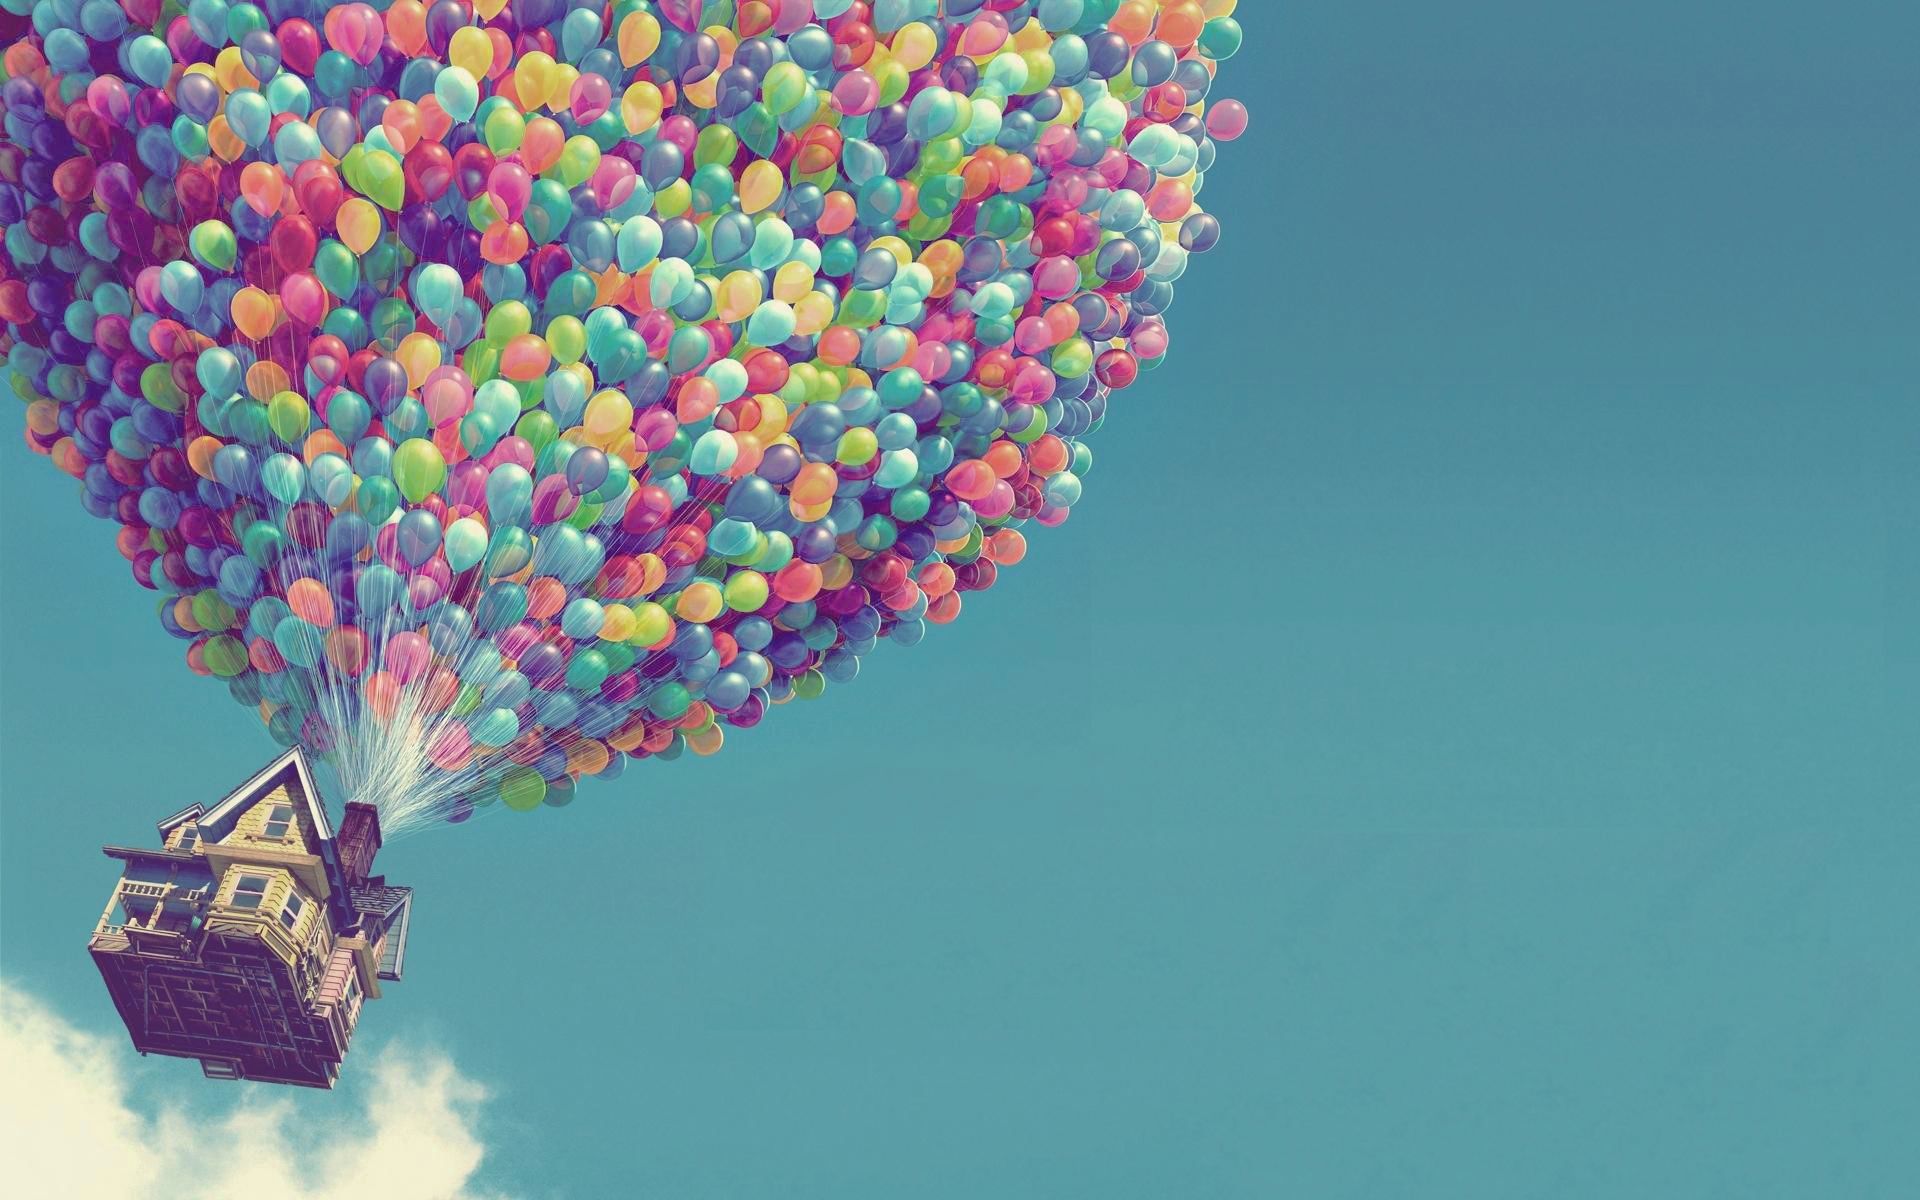 Home With Balloons - HD Wallpaper 